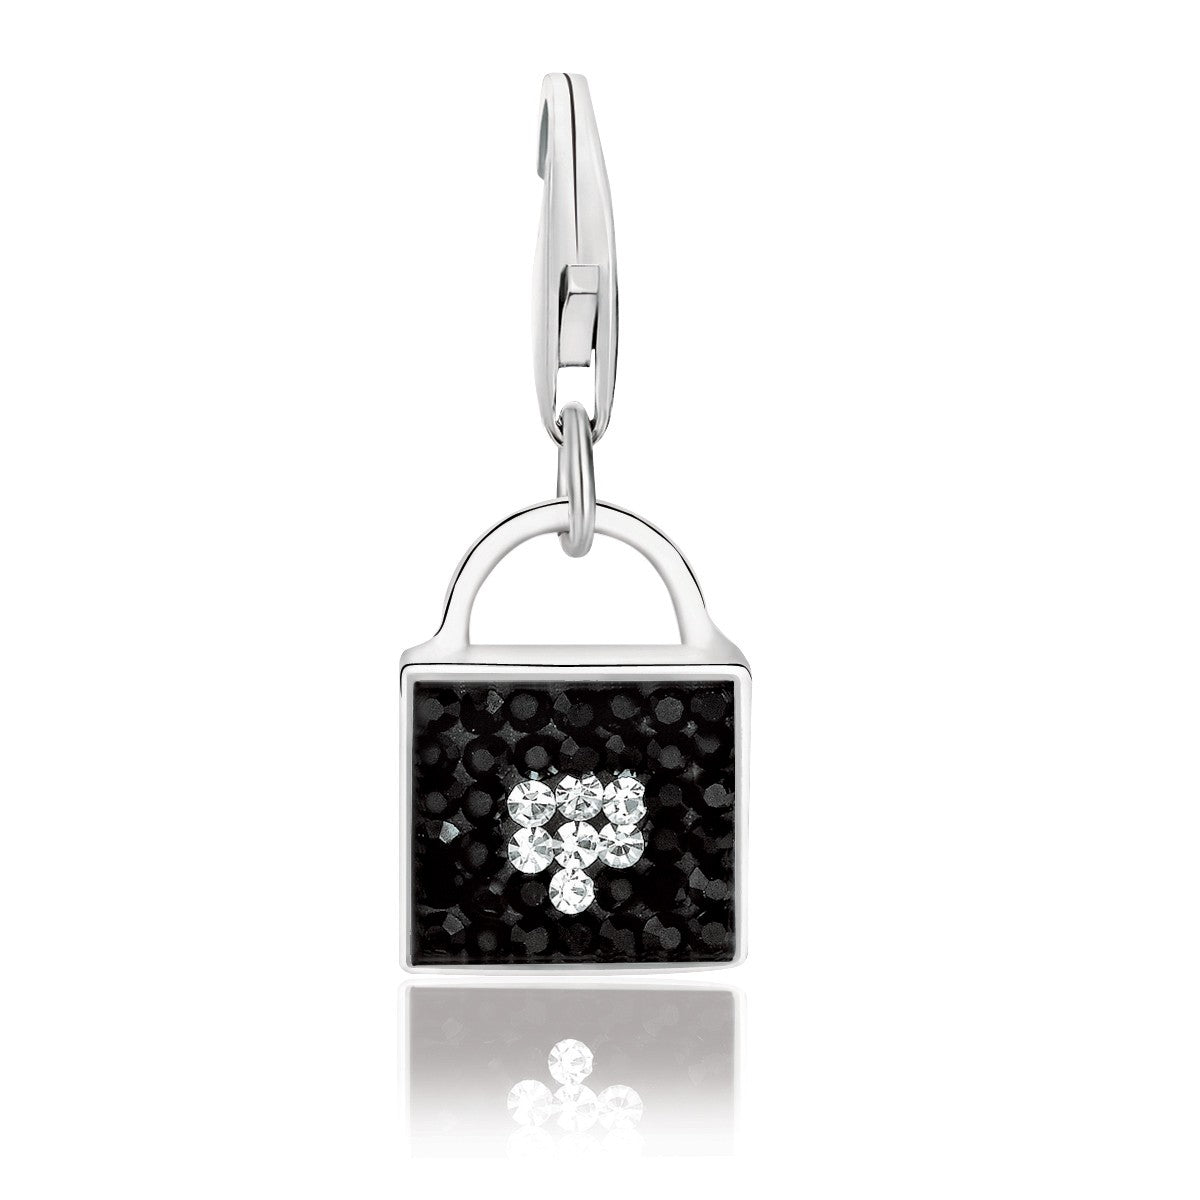 Sterling Silver Handbag Charm with Black and White Tone Crystal Accents